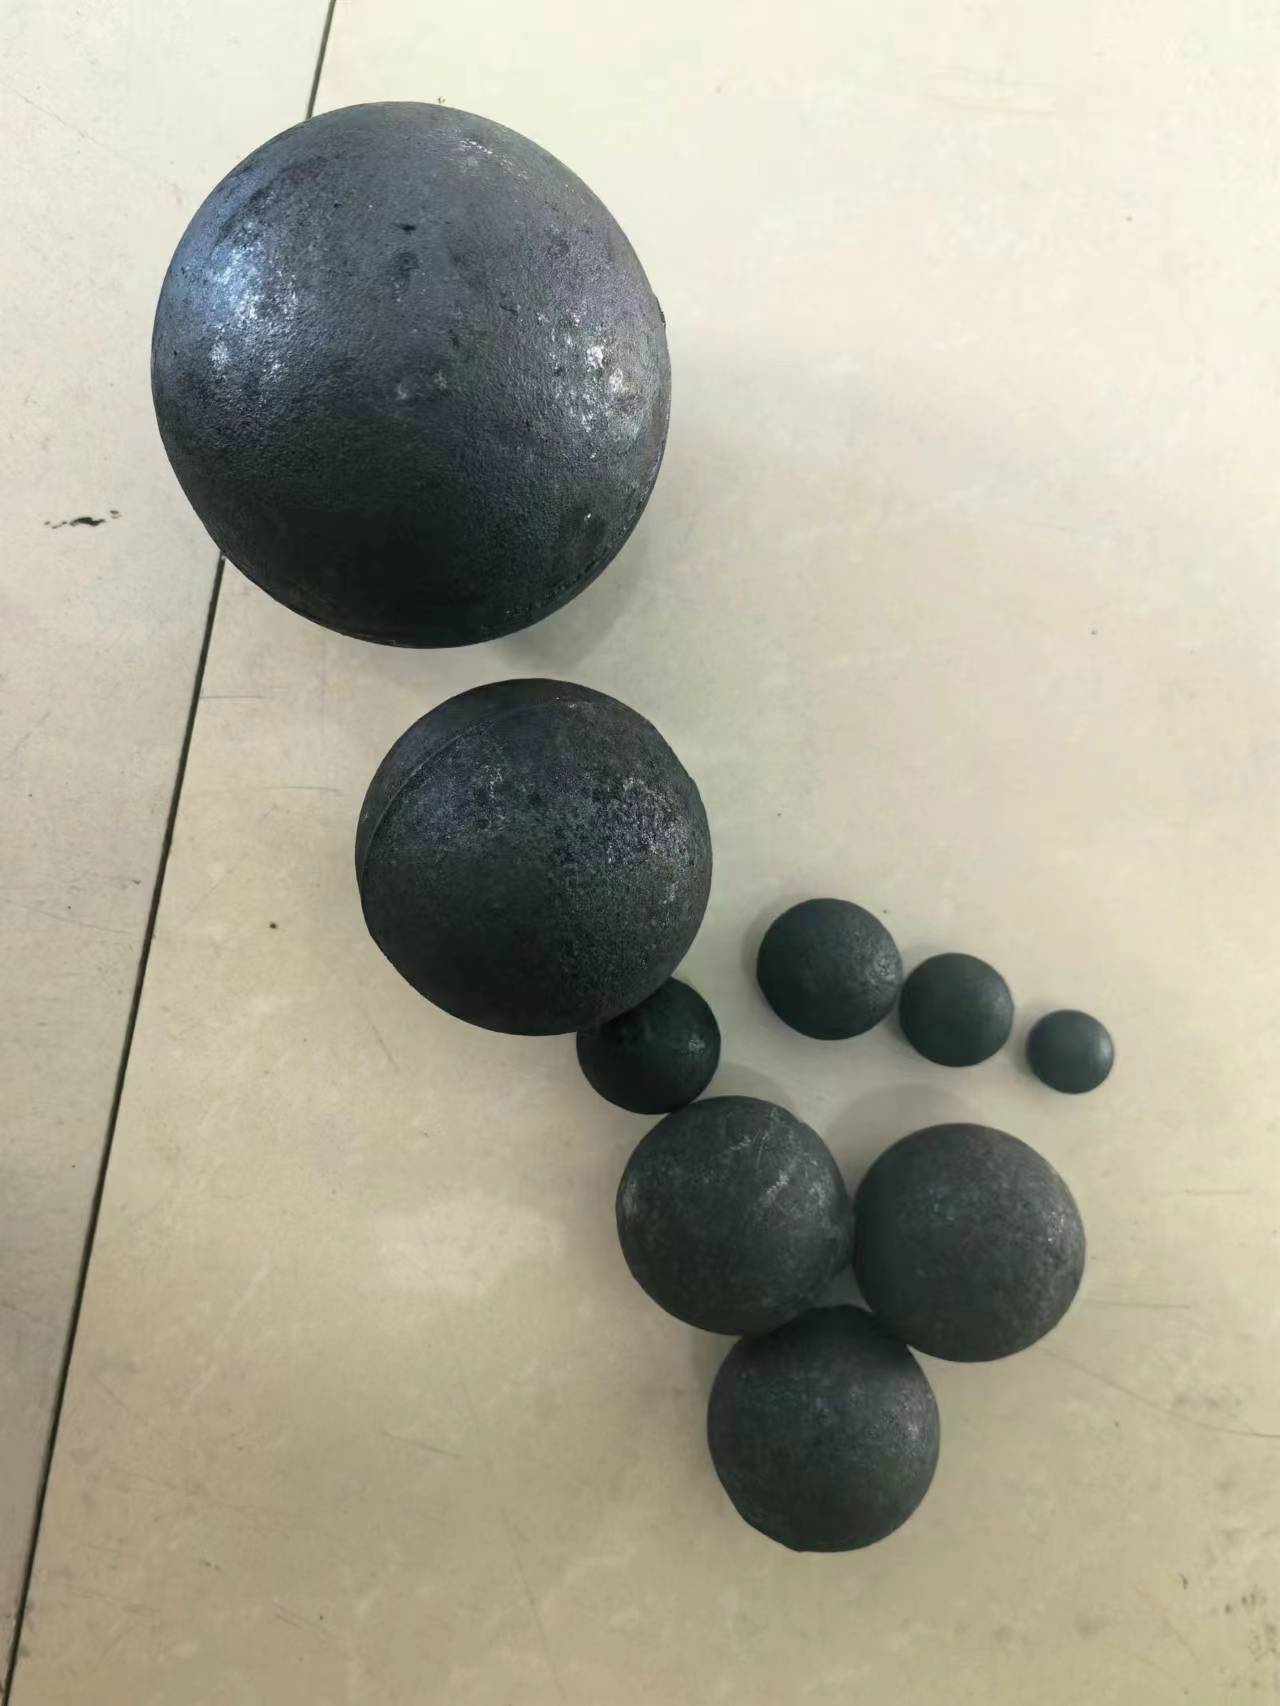 Factors to Consider When Choosing Materials for Grinding Ball Production